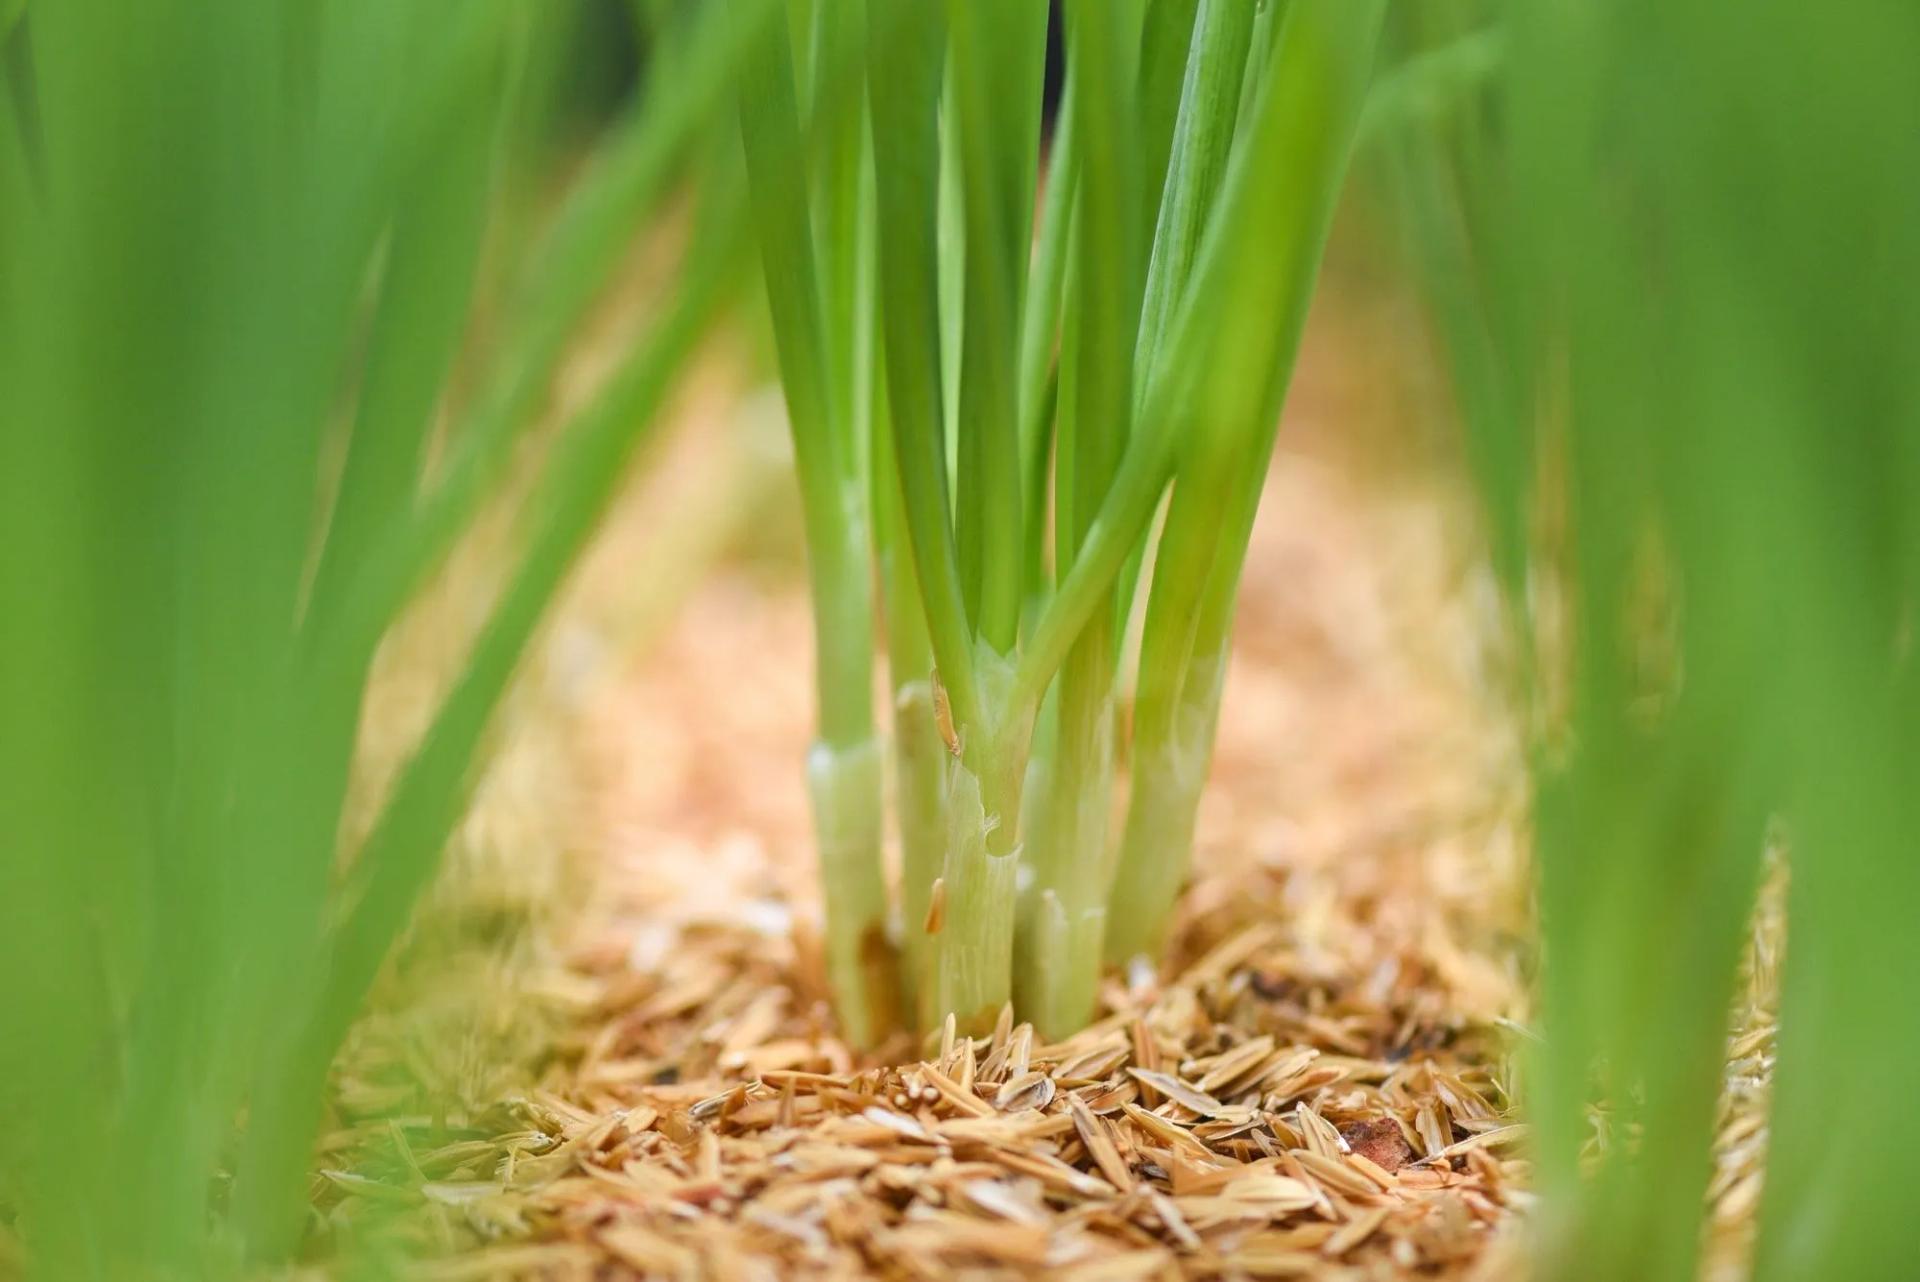 Green Onions with Mulching